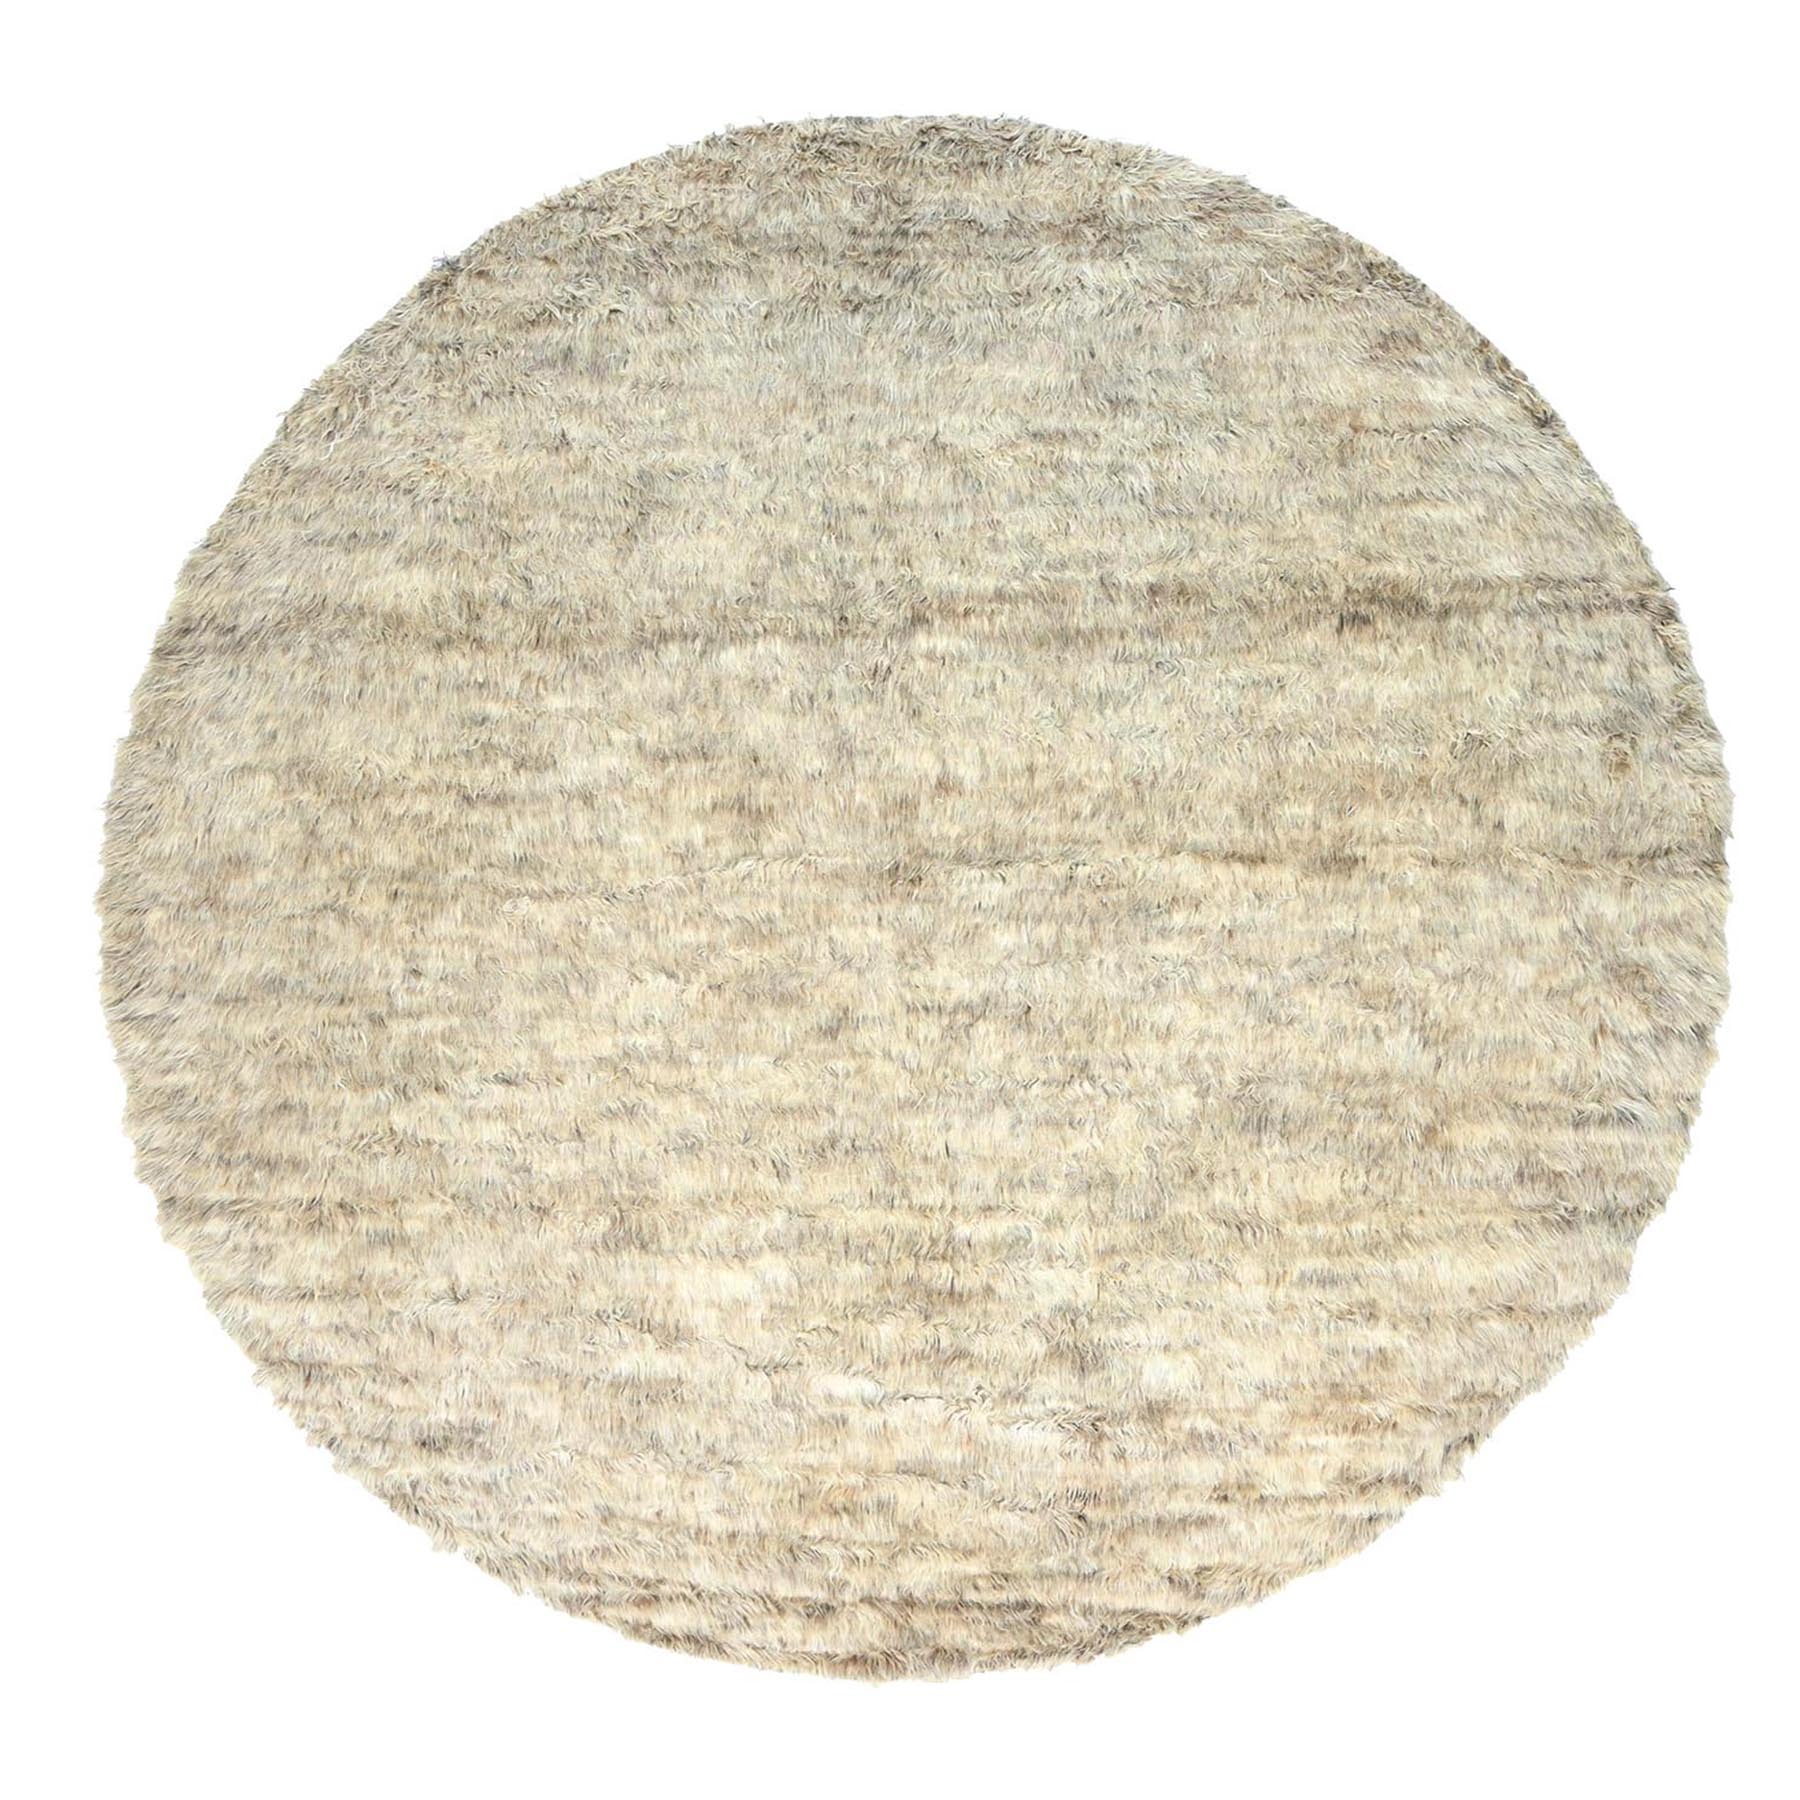  Wool Hand-Knotted Area Rug 13'6